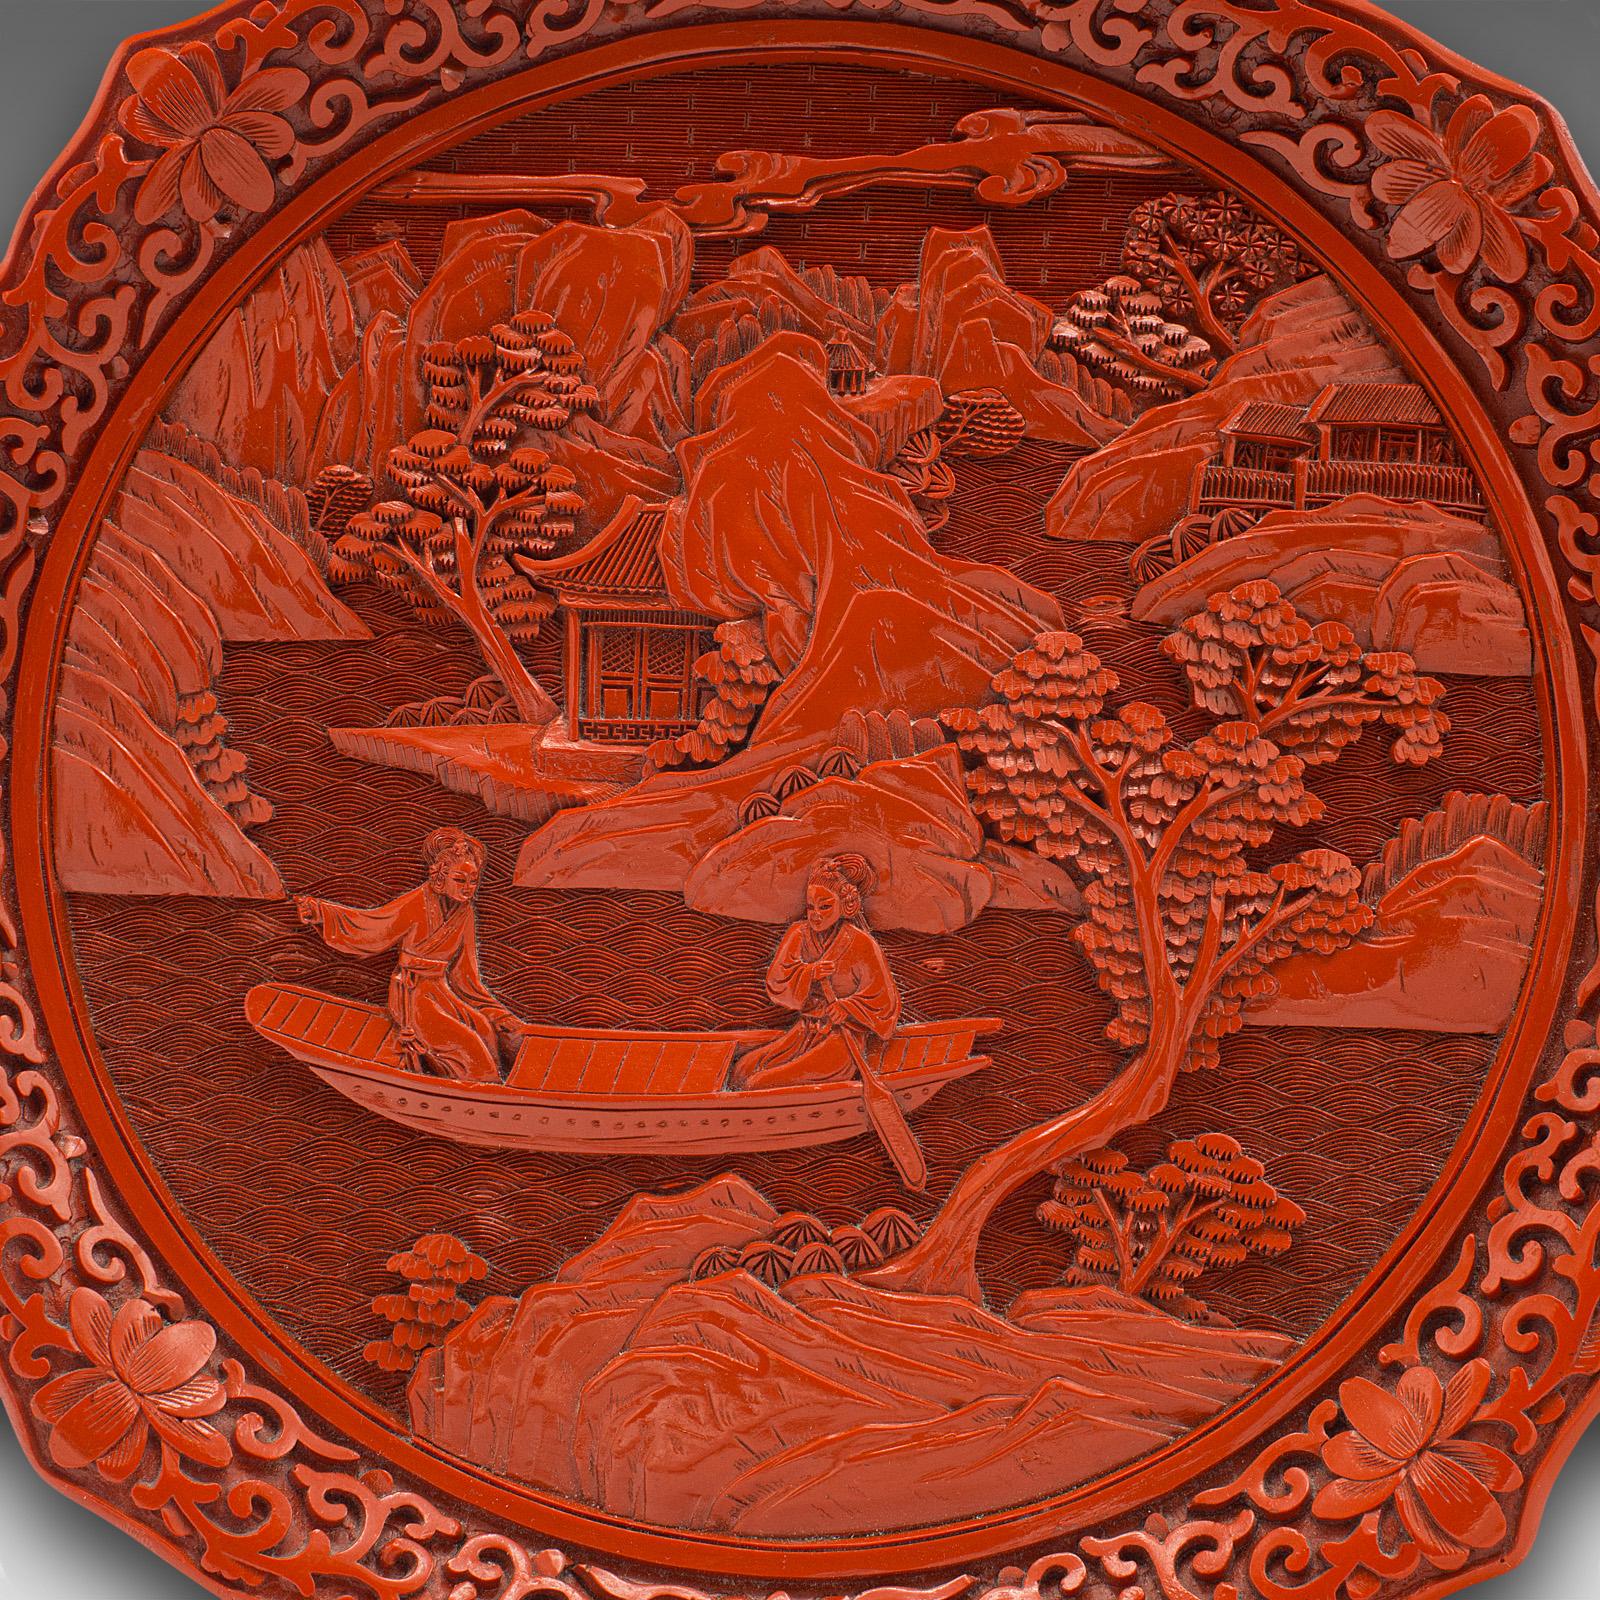 Lacquer Vintage Cinnabar Display Plate, Chinese, Decorative Serving Dish, Oriental Taste For Sale